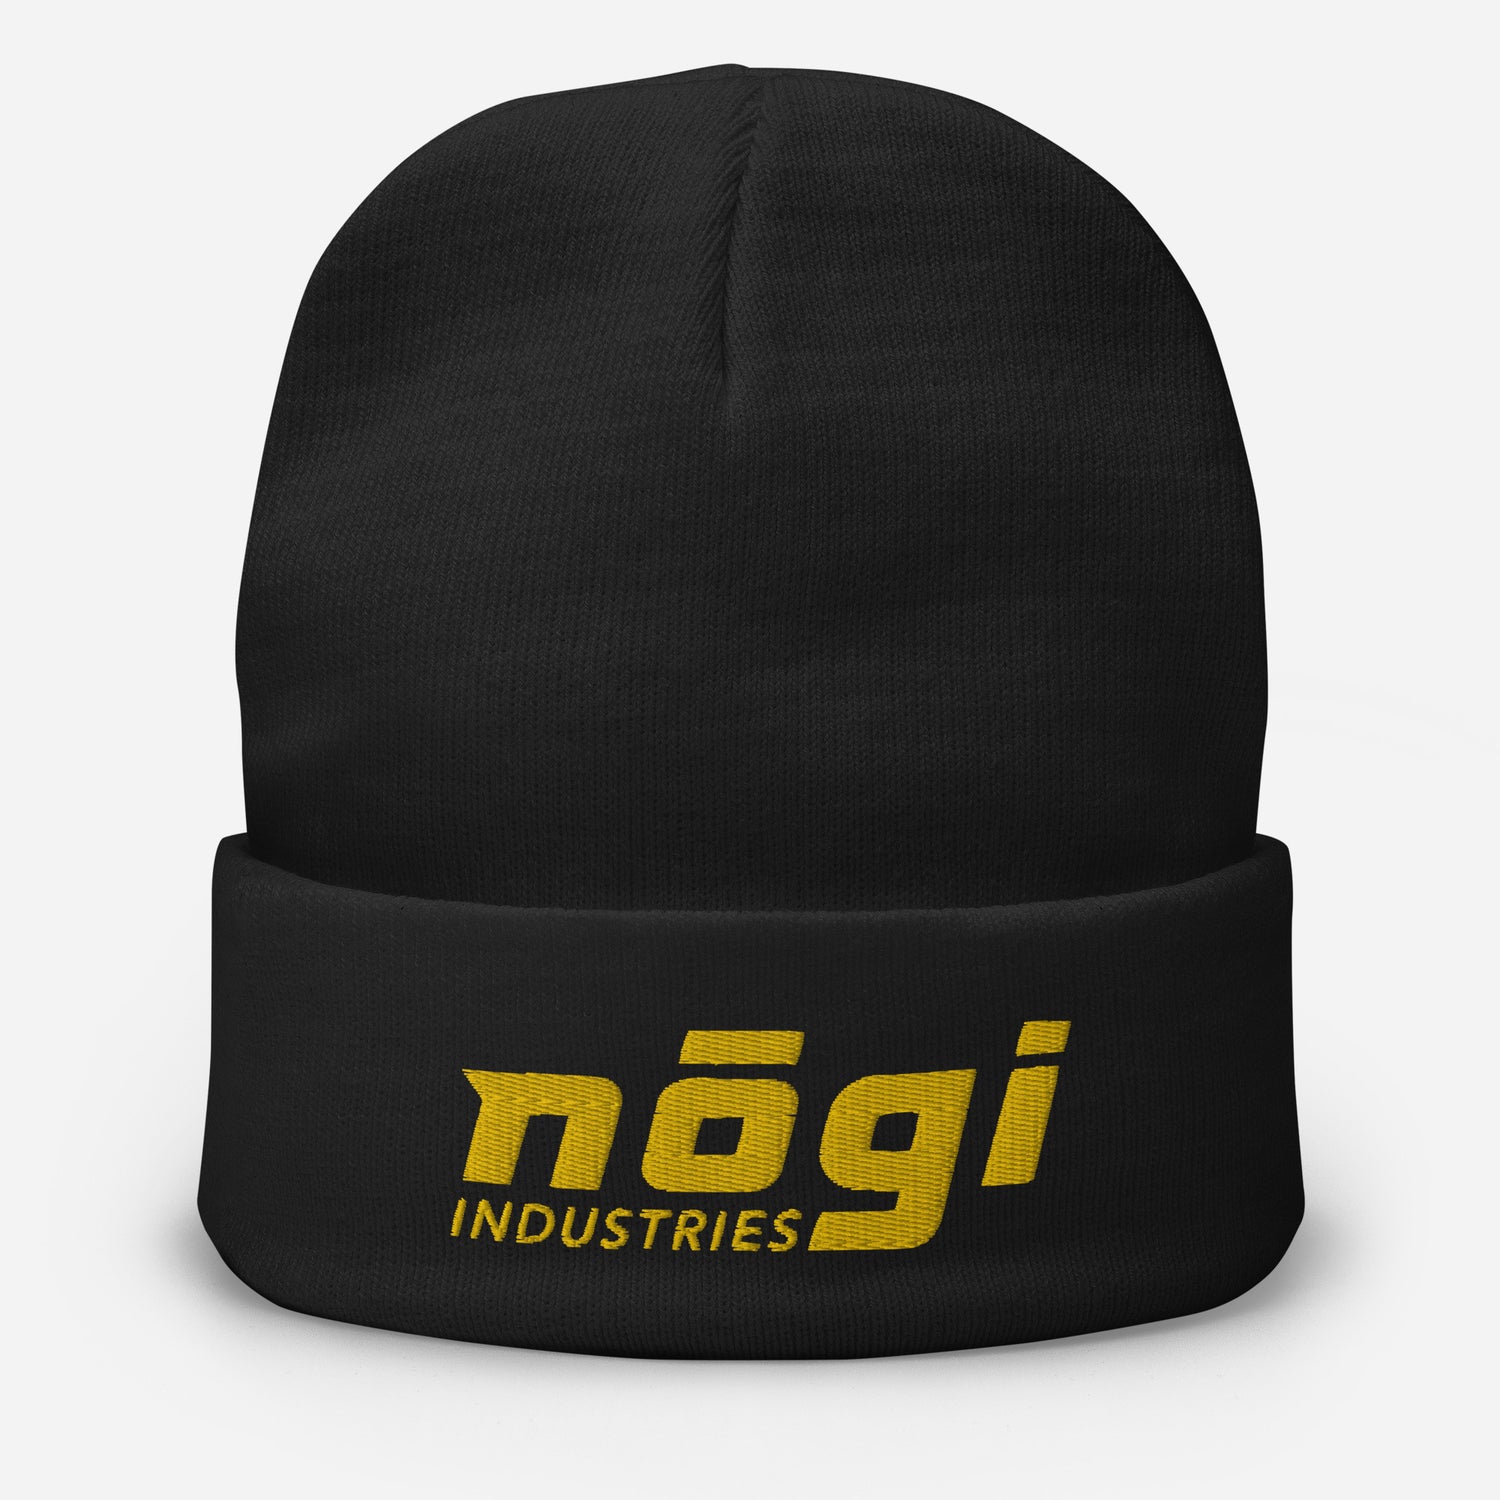 Embroidered Beanie w Puff logo (Black & Gold) by Nogi Industries